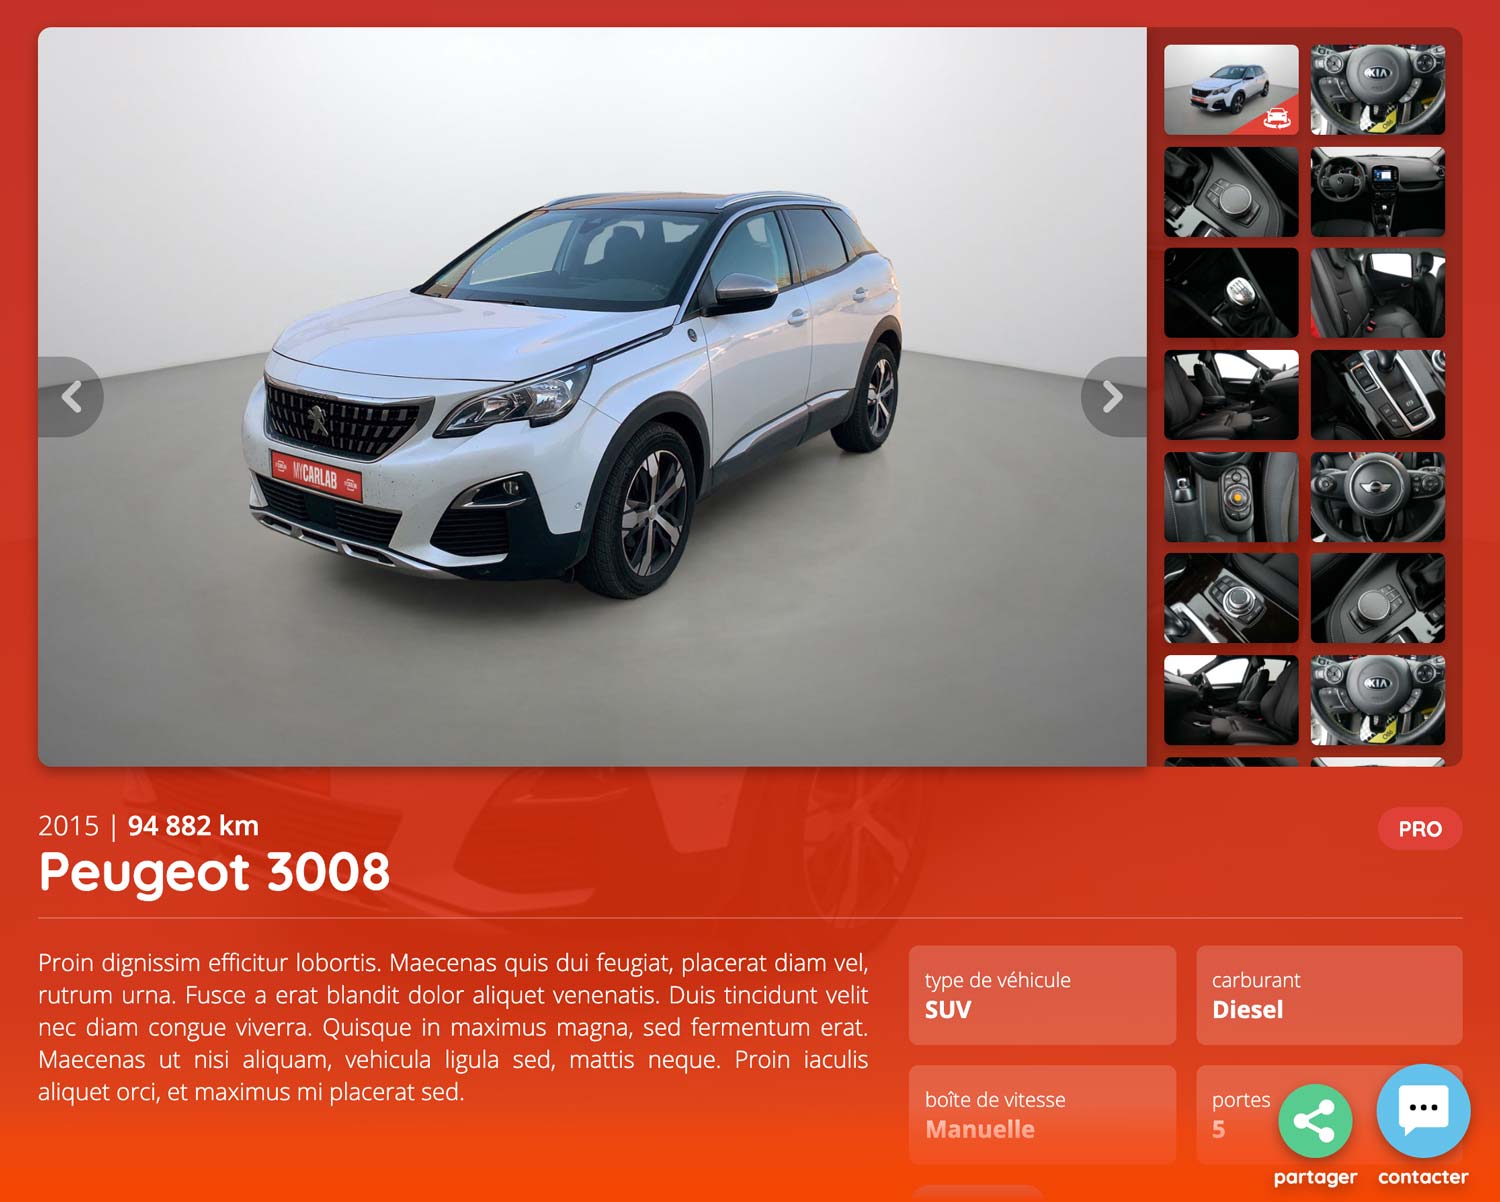 screen mycarlab page partage 360 photos voiture carlab peugeot 3008